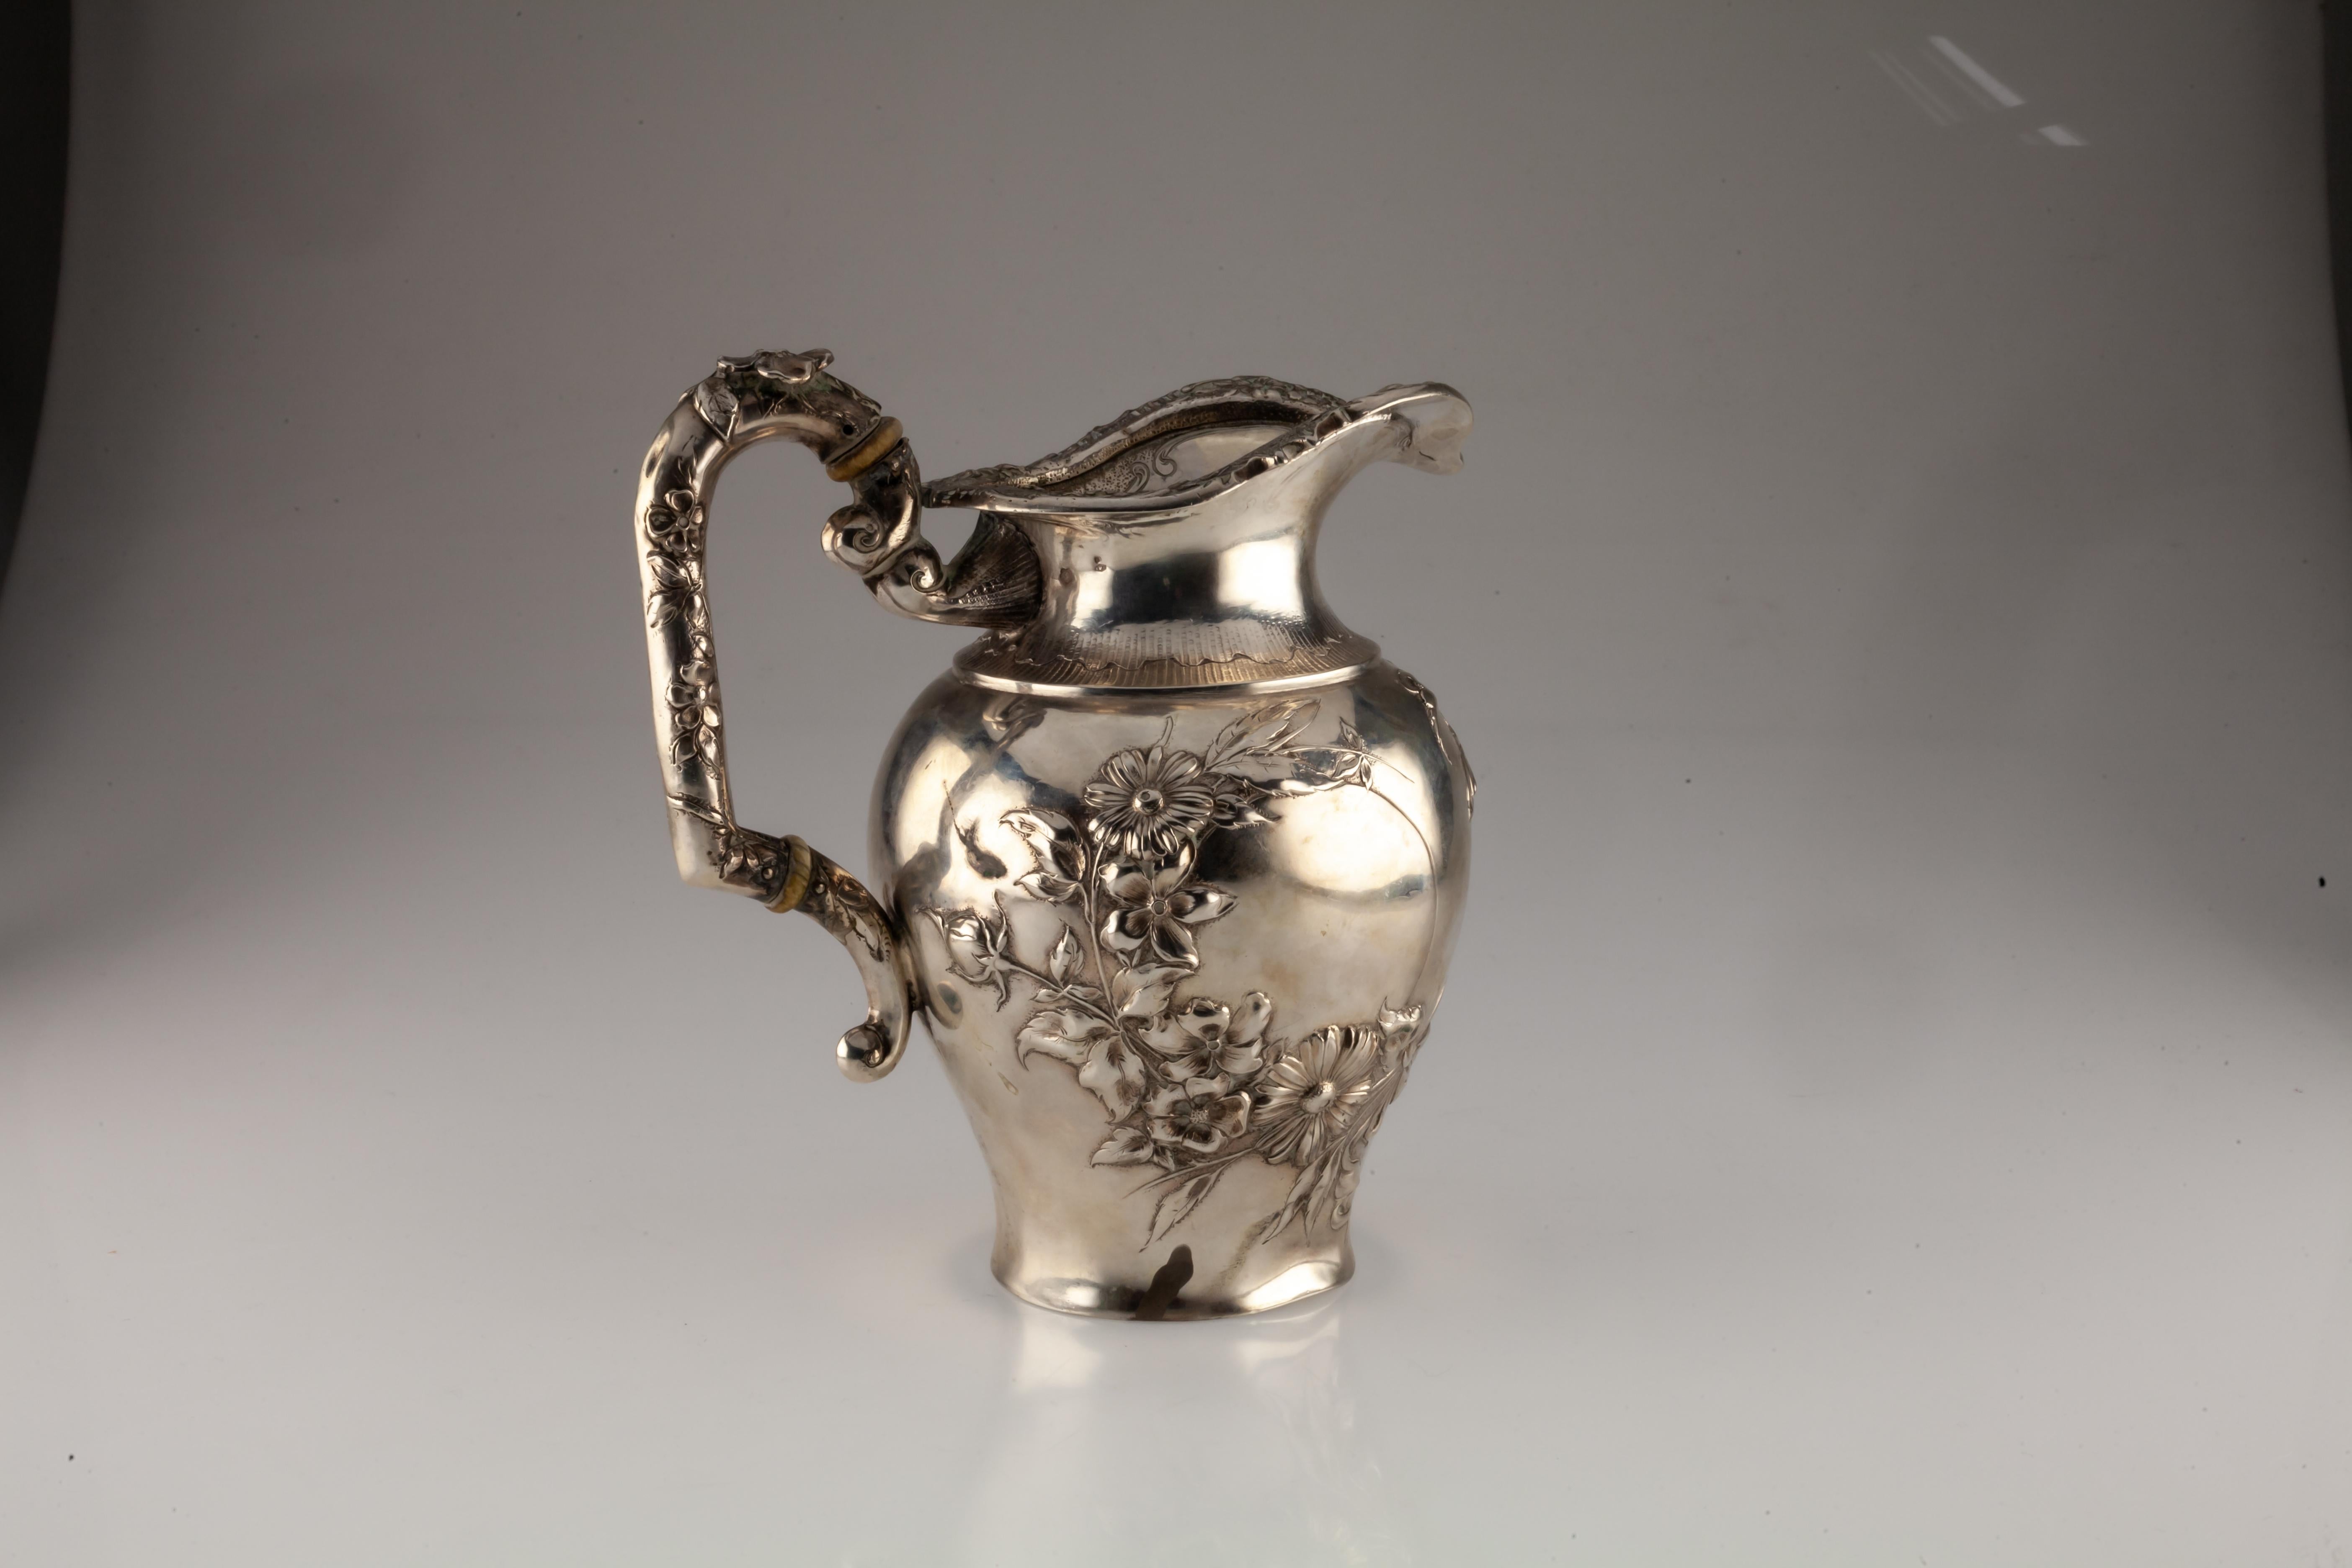 Ornate Sterling Silver British Tea/Coffee Set 1930s Hand-Chased For Sale 1